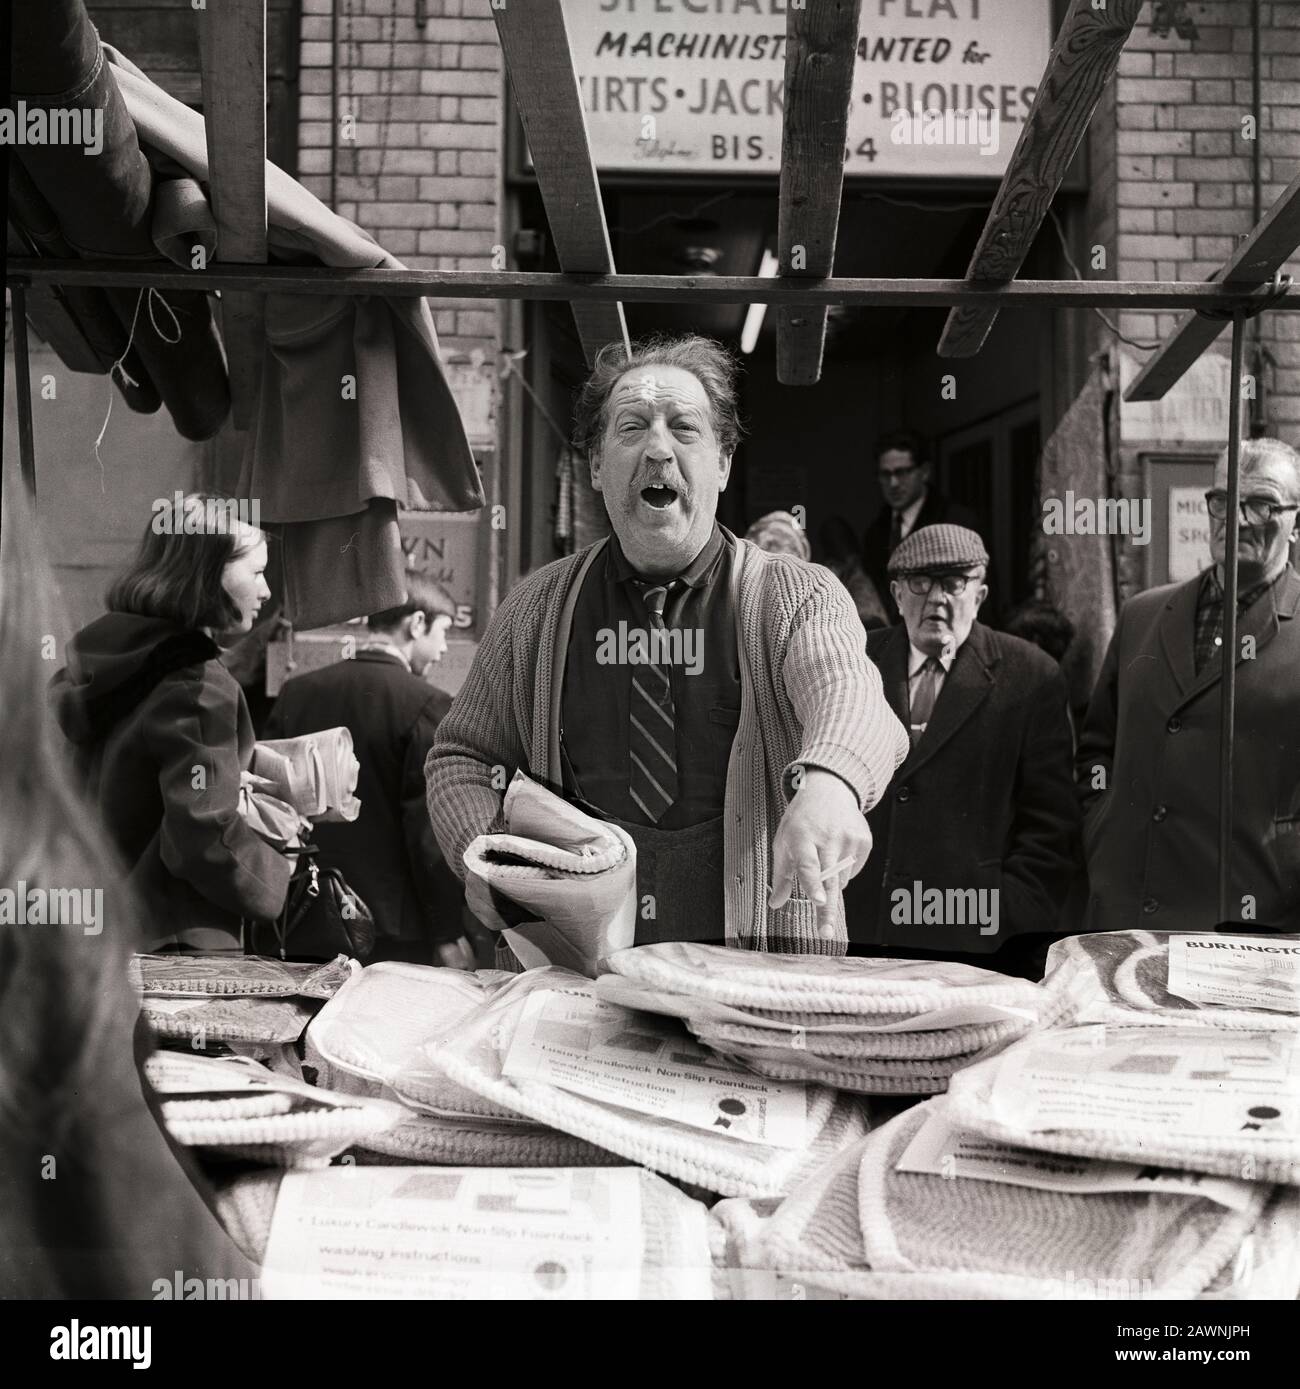 Brisk business at the Petticoat Lane Market in east London. The man is selling covers for toilet seats. Stock Photo